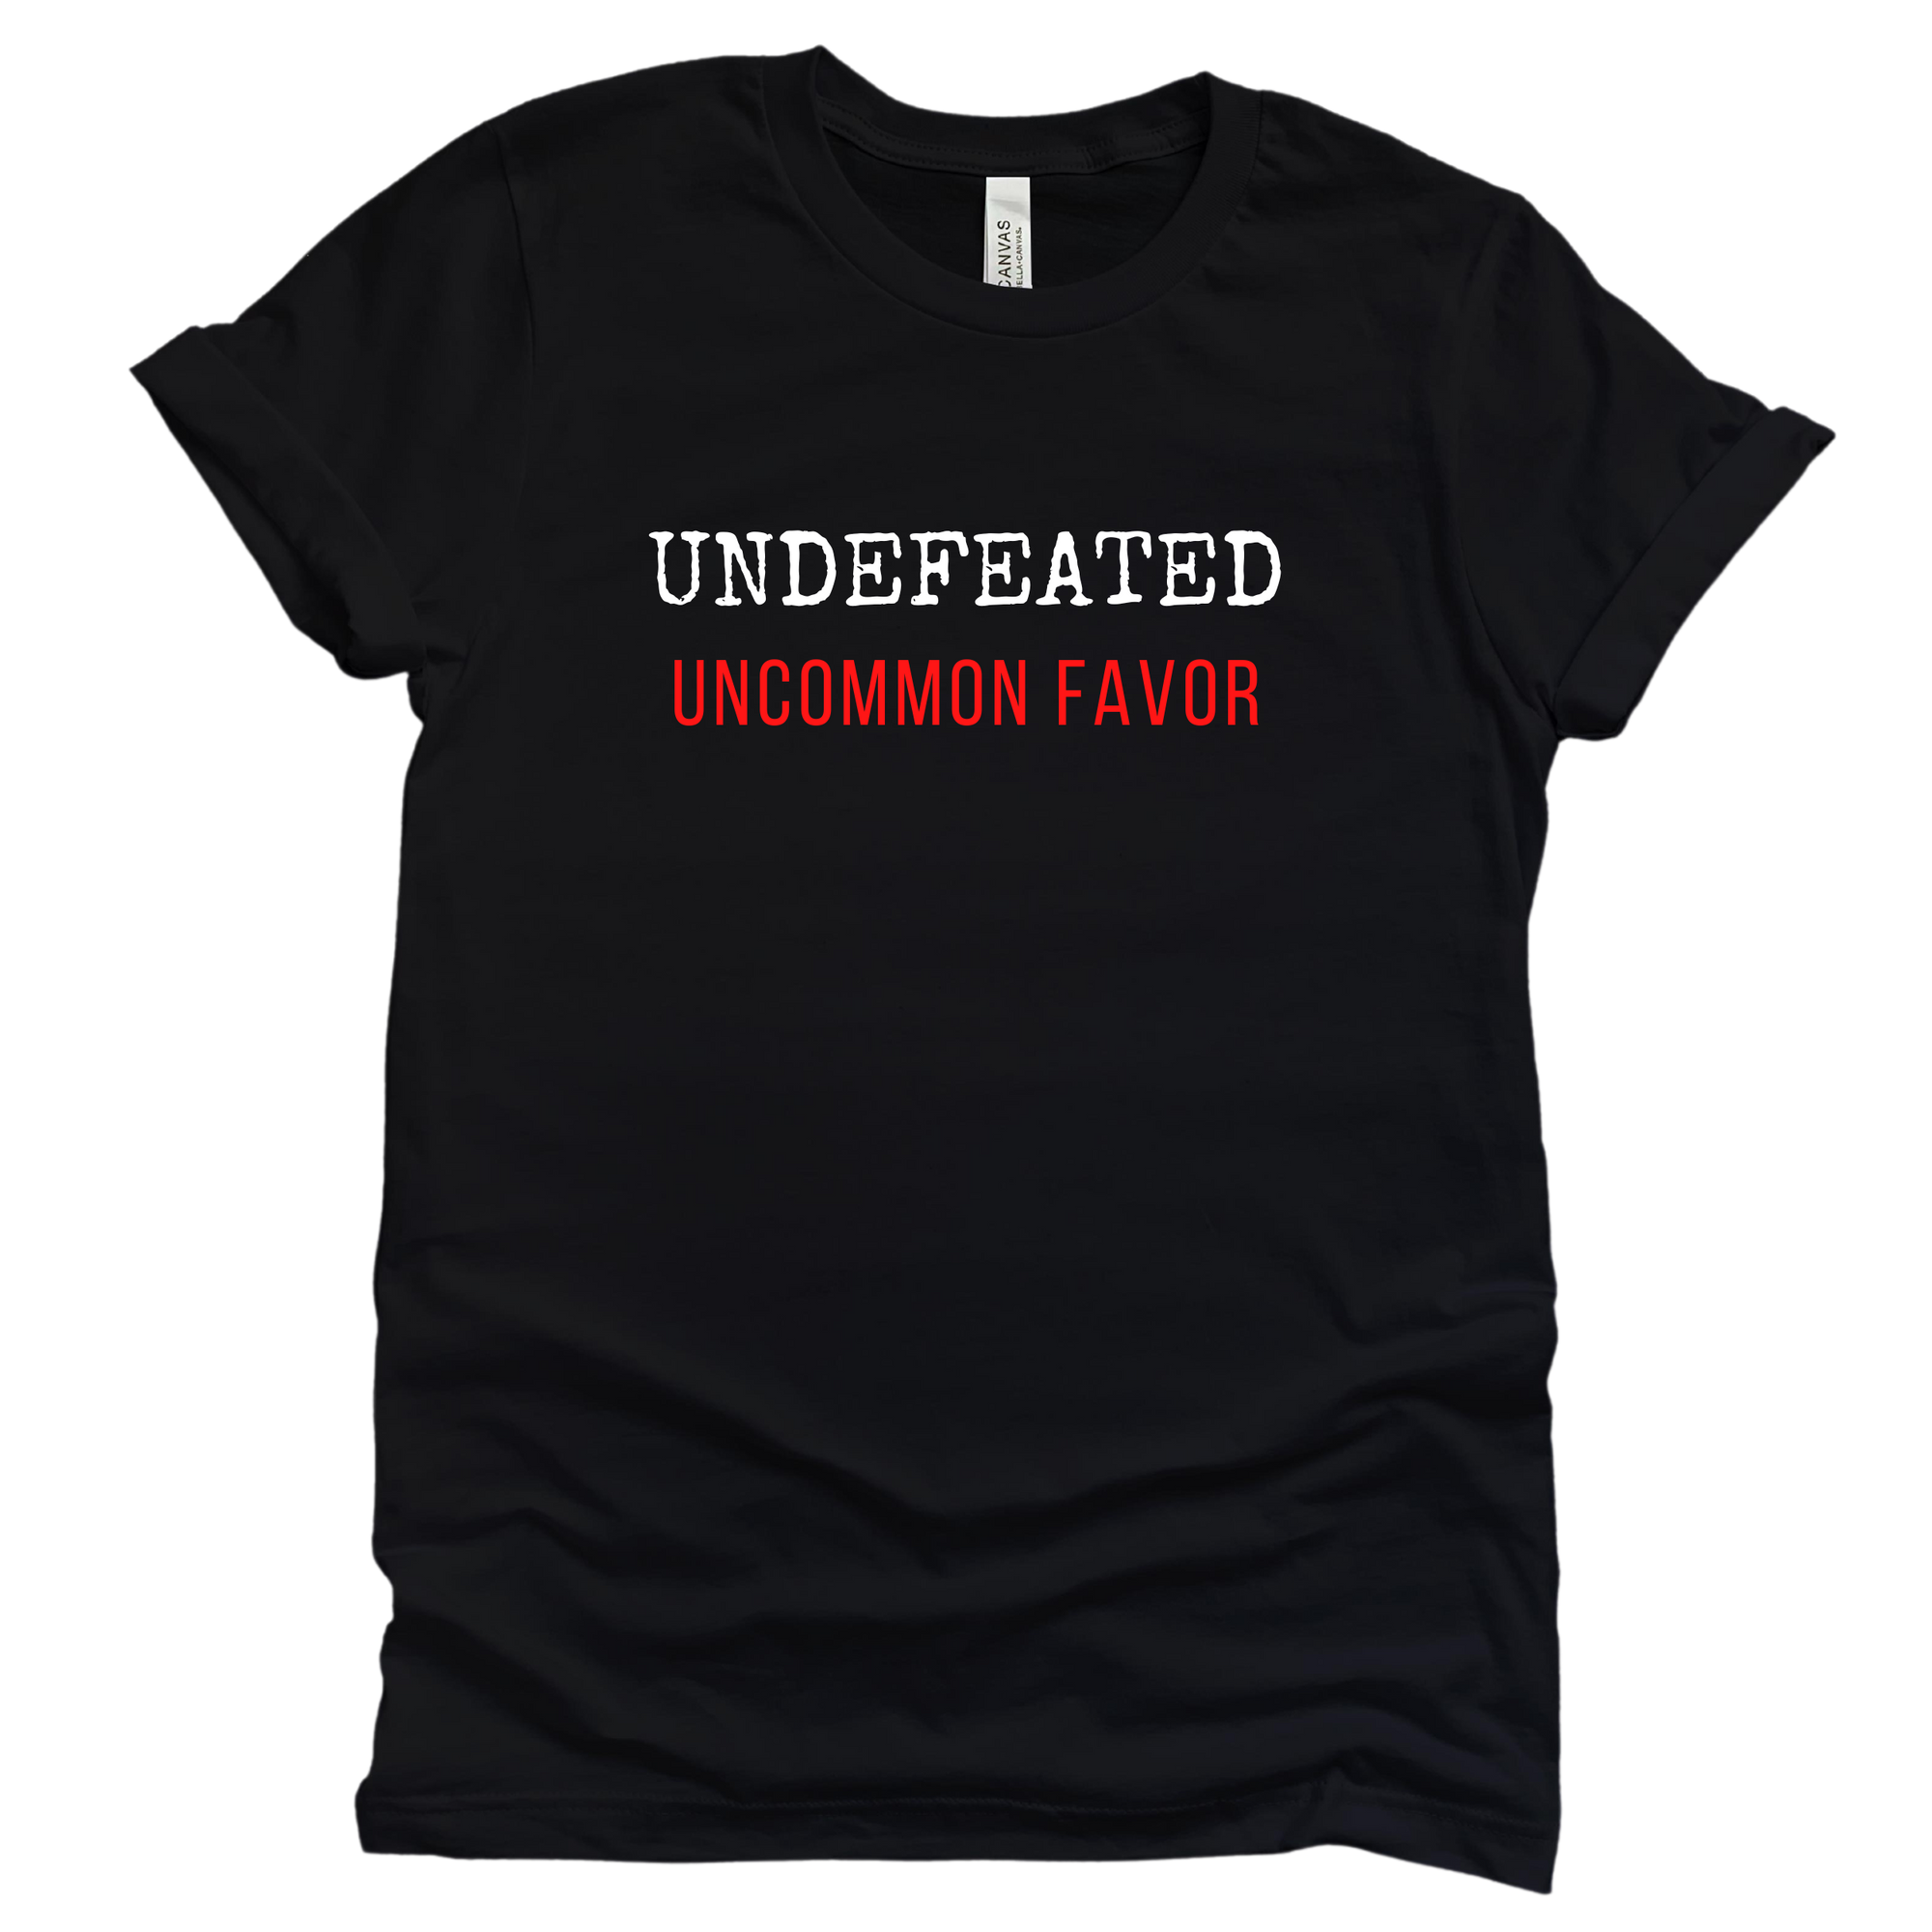 Undefeated - Uncommon Favor Tee